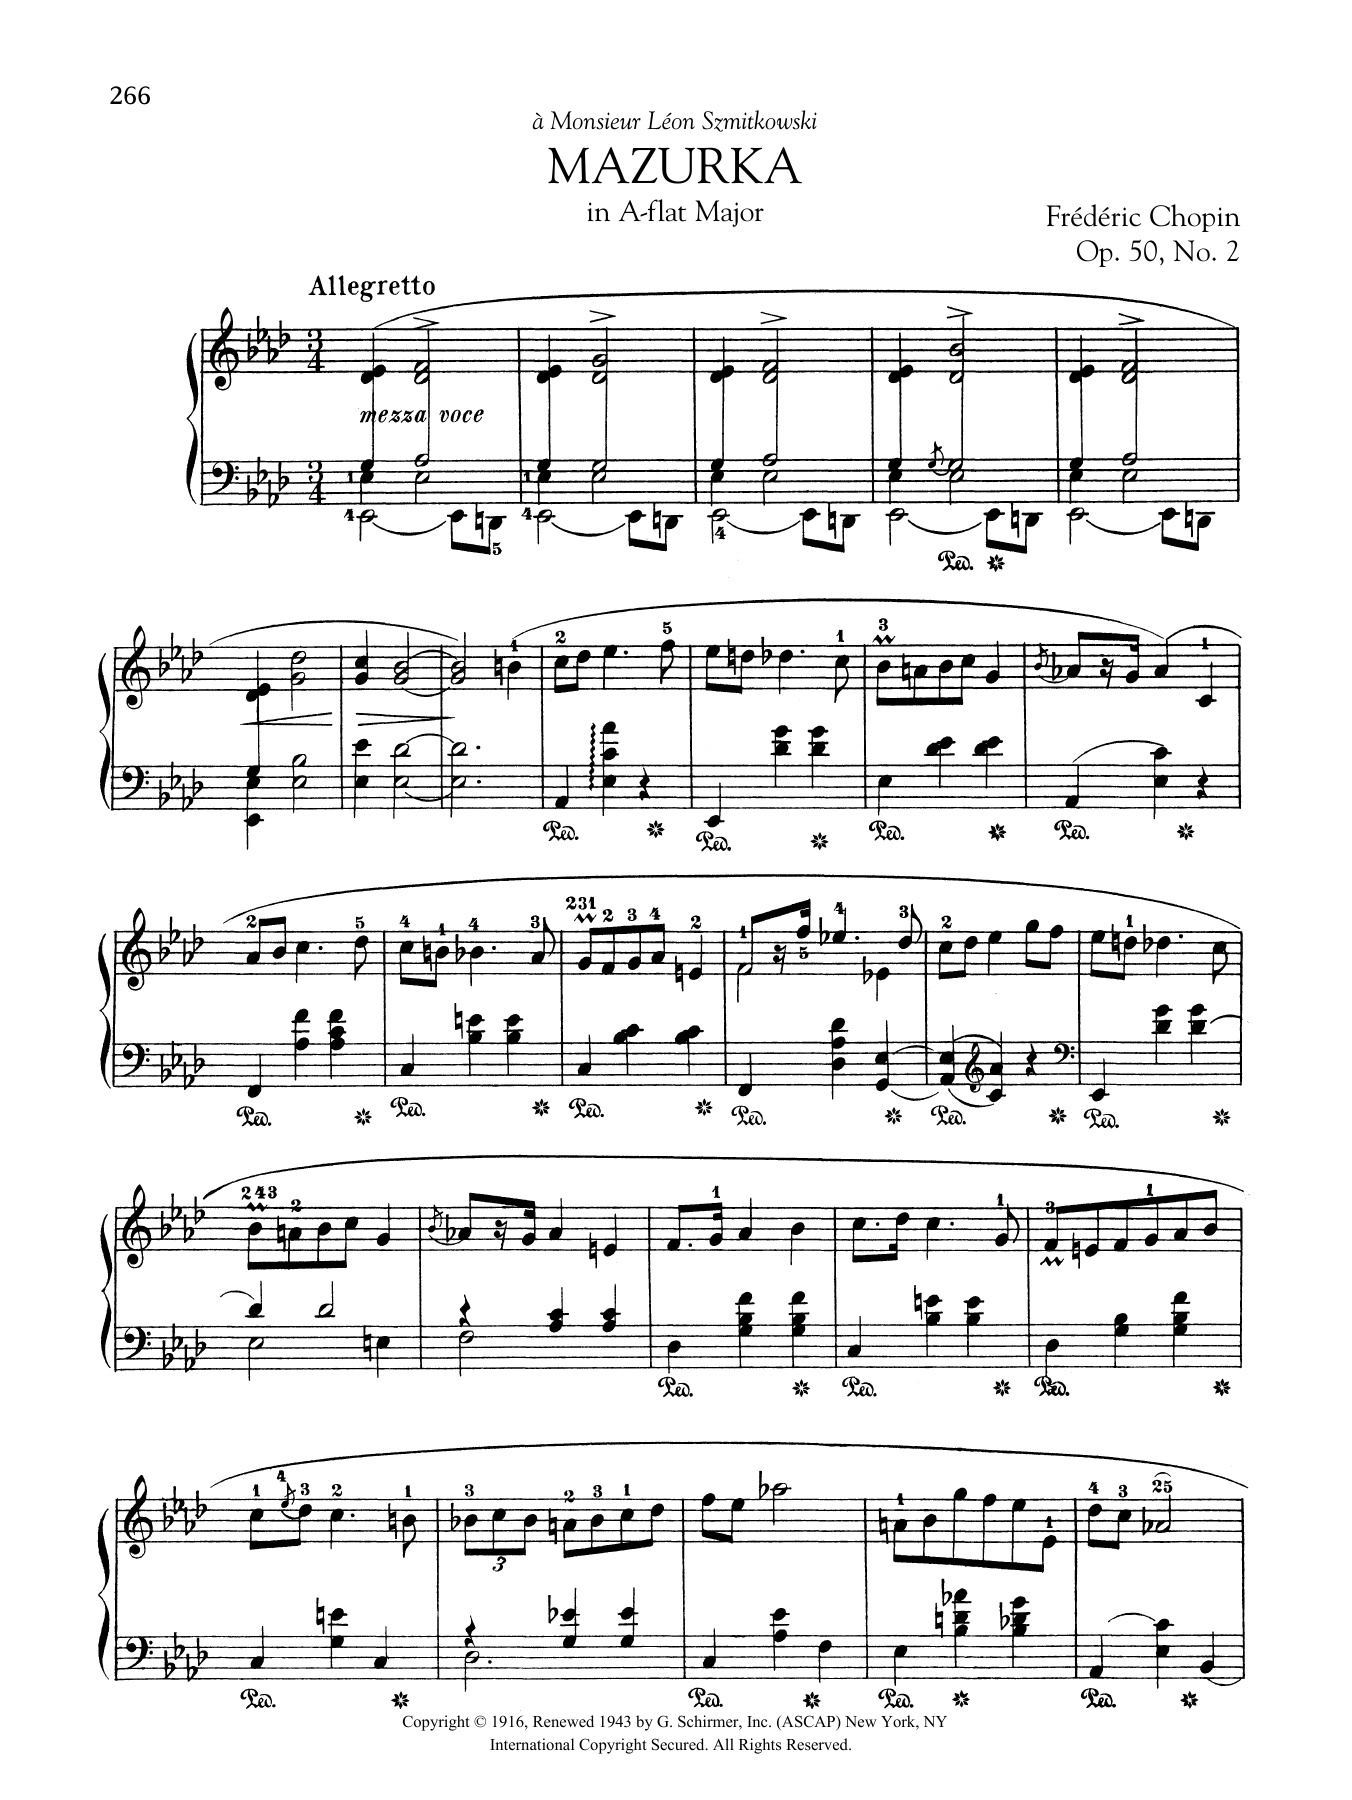 Frédéric Chopin Mazurka in A-flat Major, Op. 50, No. 2 sheet music notes and chords. Download Printable PDF.